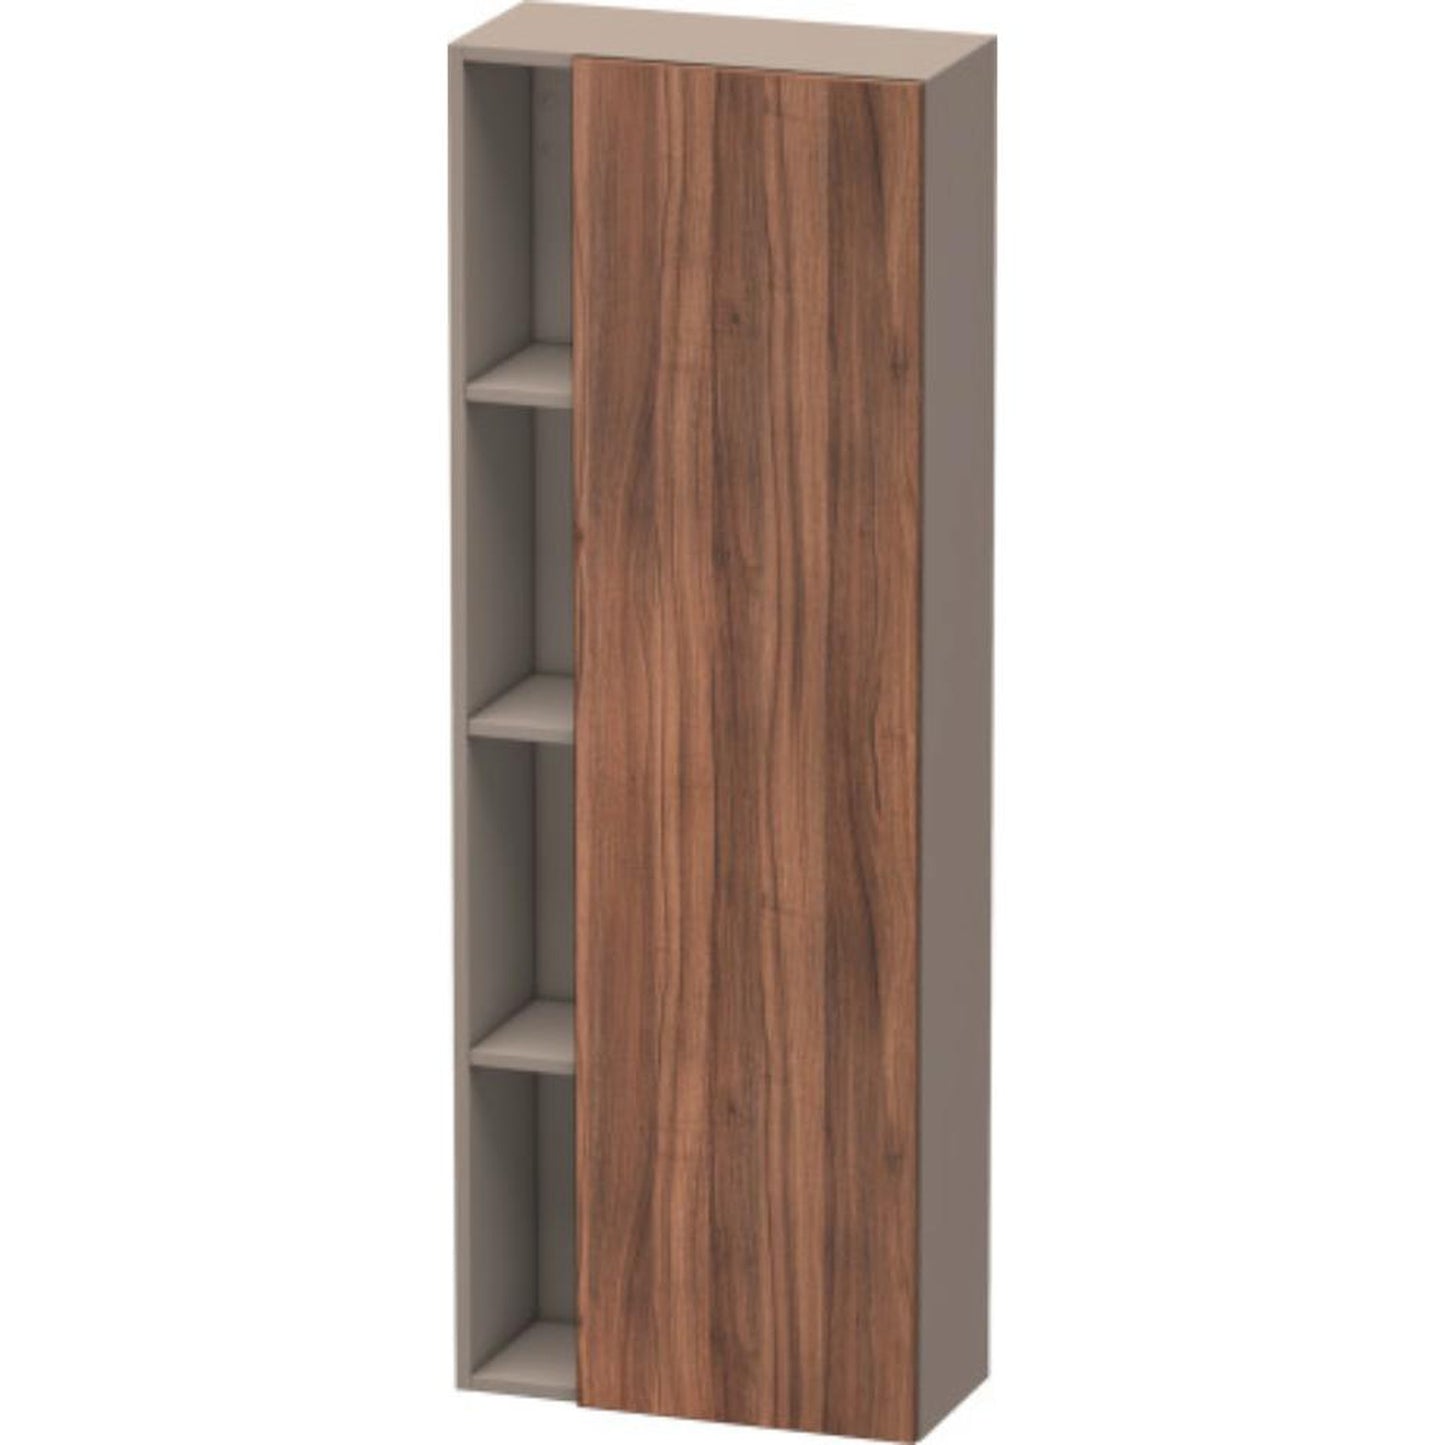 Duravit DuraStyle 20" x 55" x 9" Tall Cabinet With Right Hinge One Door in Natural Walnut and Basalt (DS1238R7943)